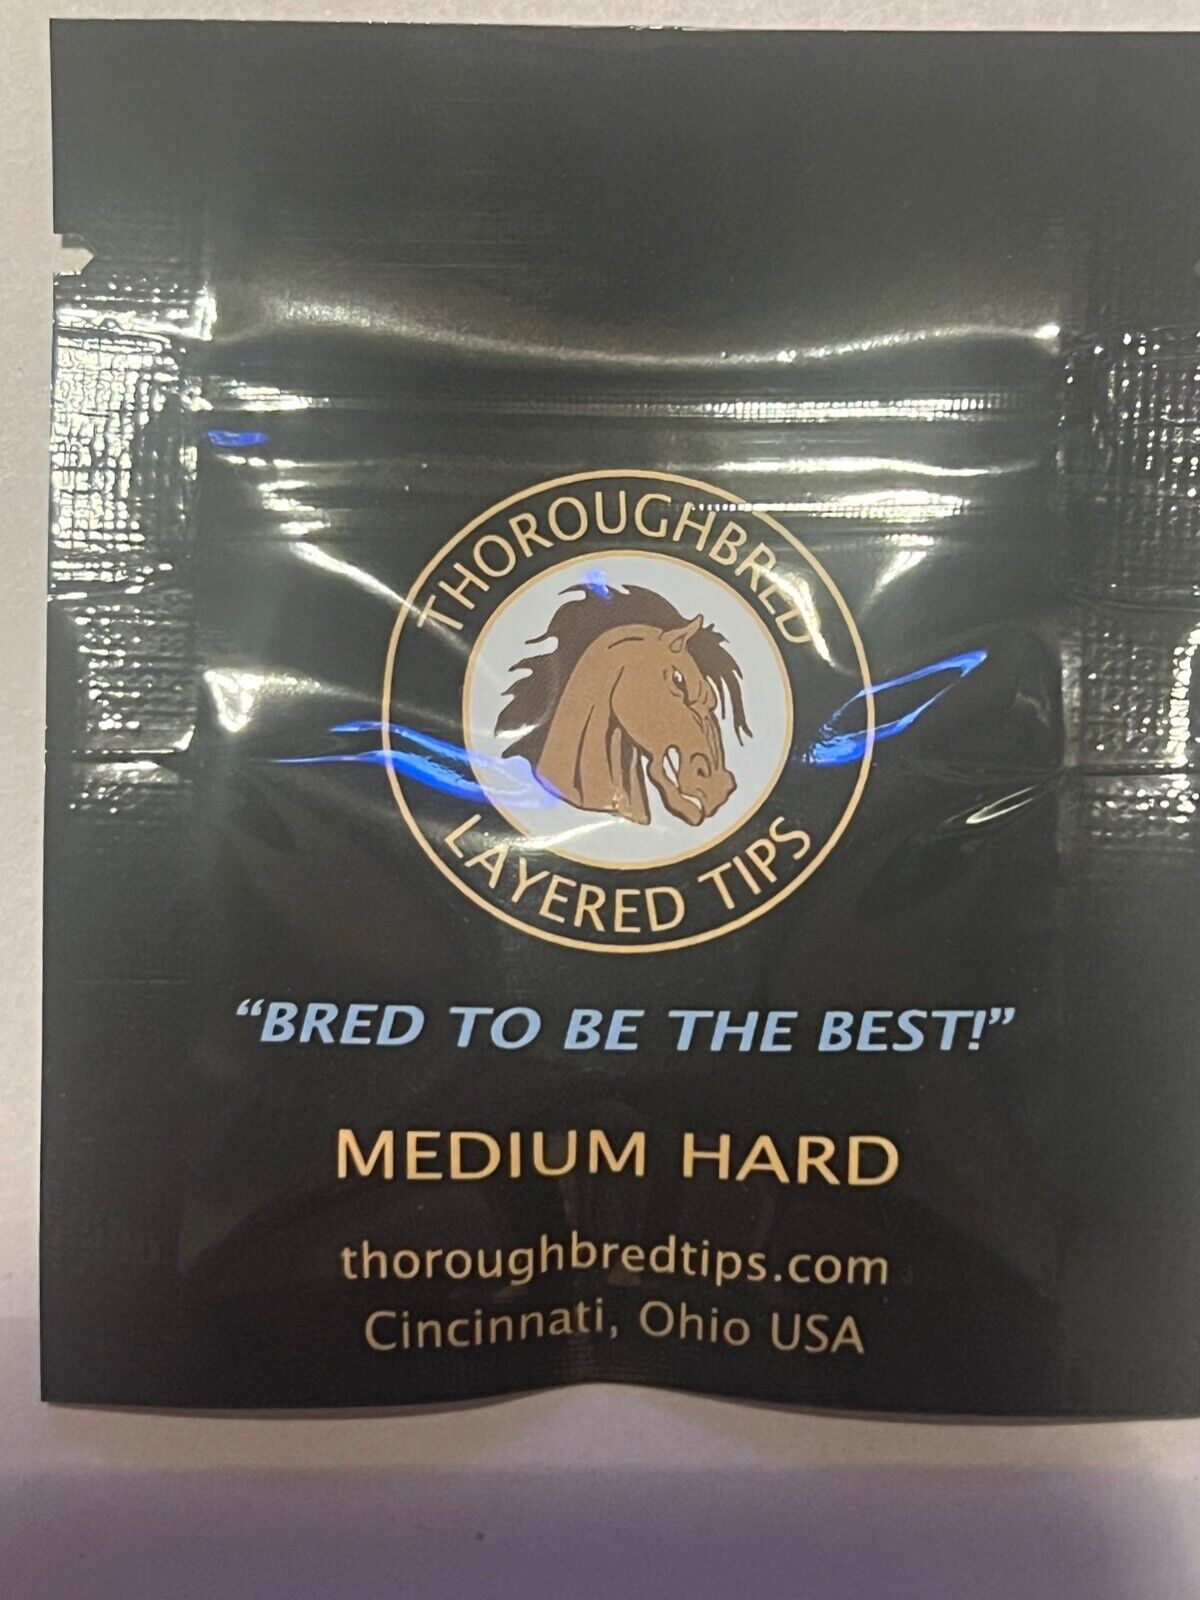 THOROUGHBRED MEDIUM HARD PIGSKIN LEATHER TIPS LISTING IS 2 TIPS NOT 1 SHIPS FREE